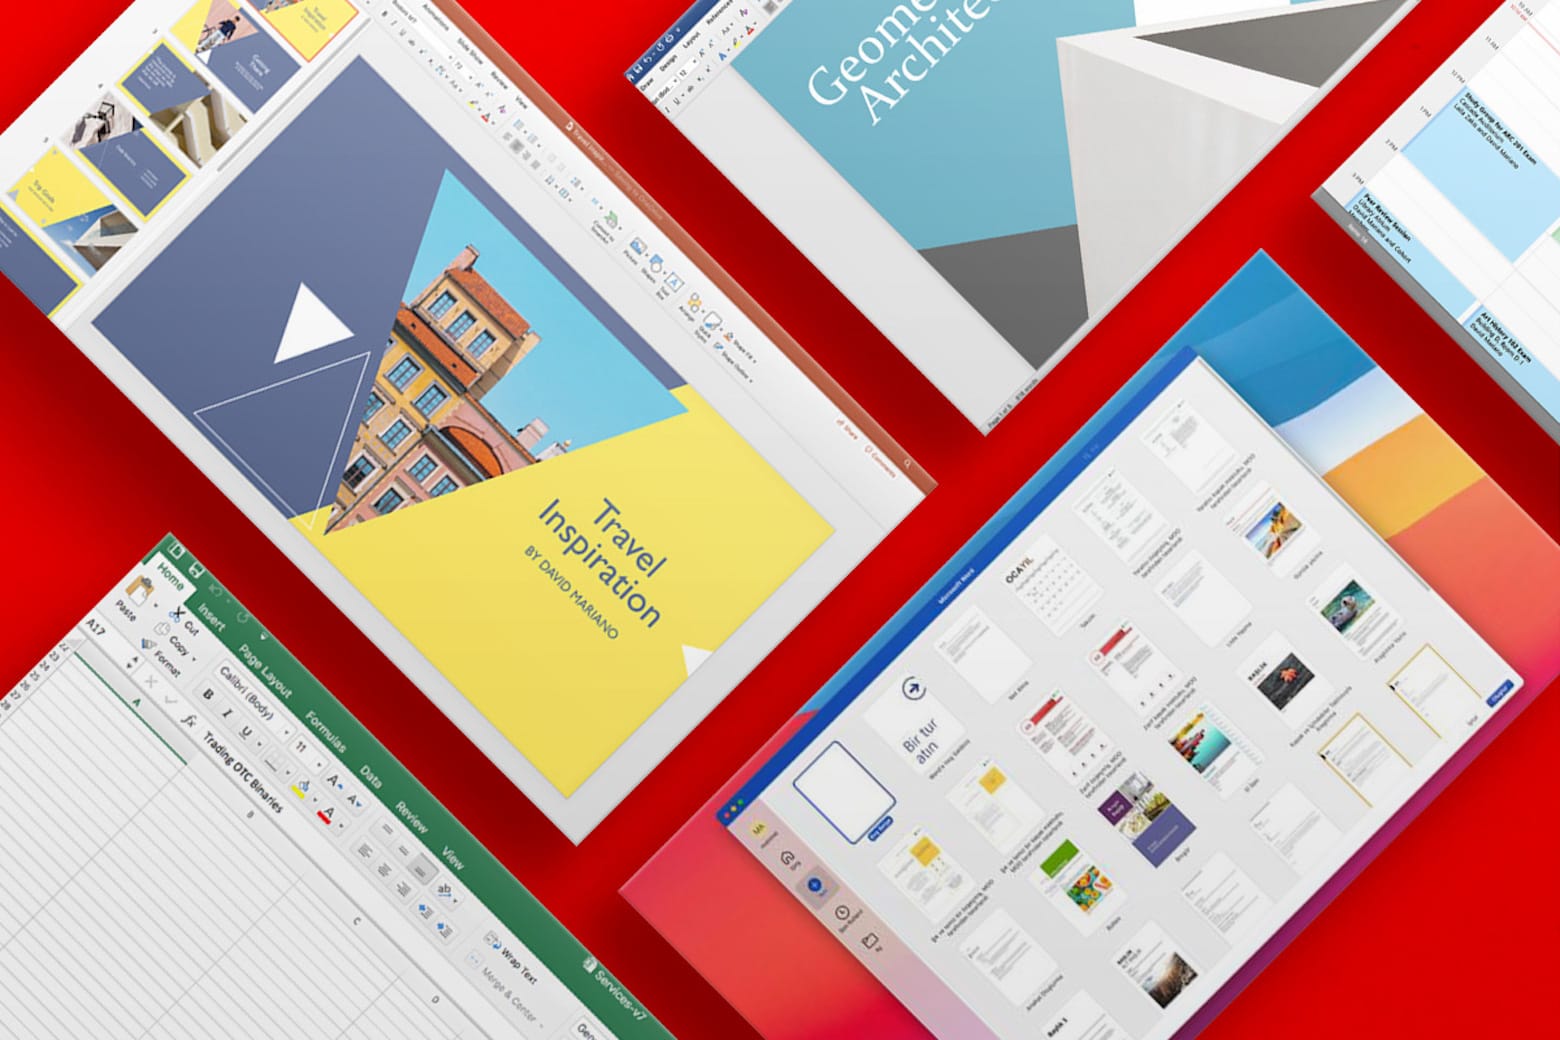 Enjoy this Microsoft Office on your Mac for life at just $29.99